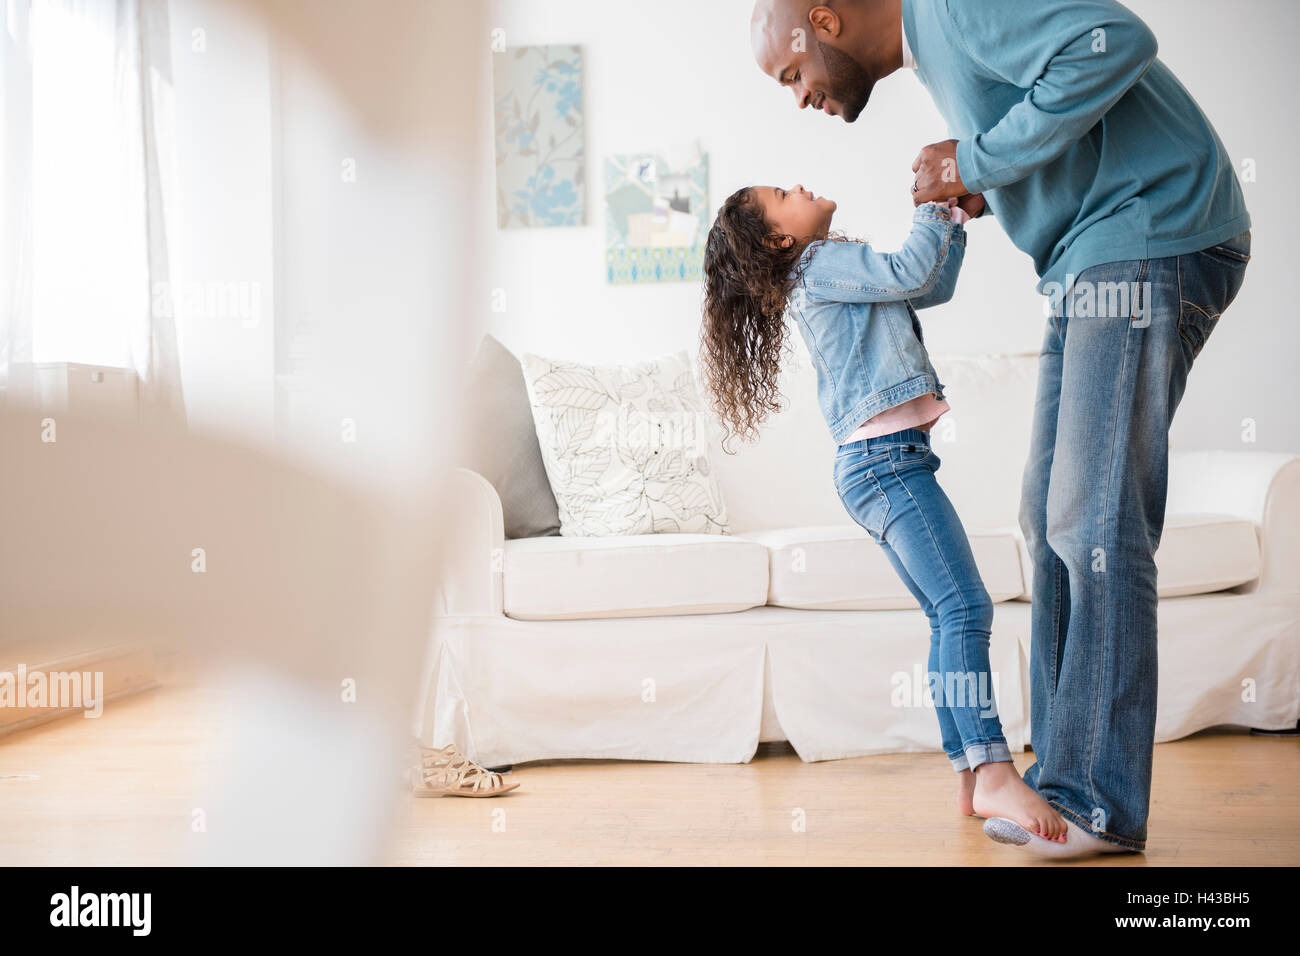 Daughter standing on feet of father and dancing Stock Photo